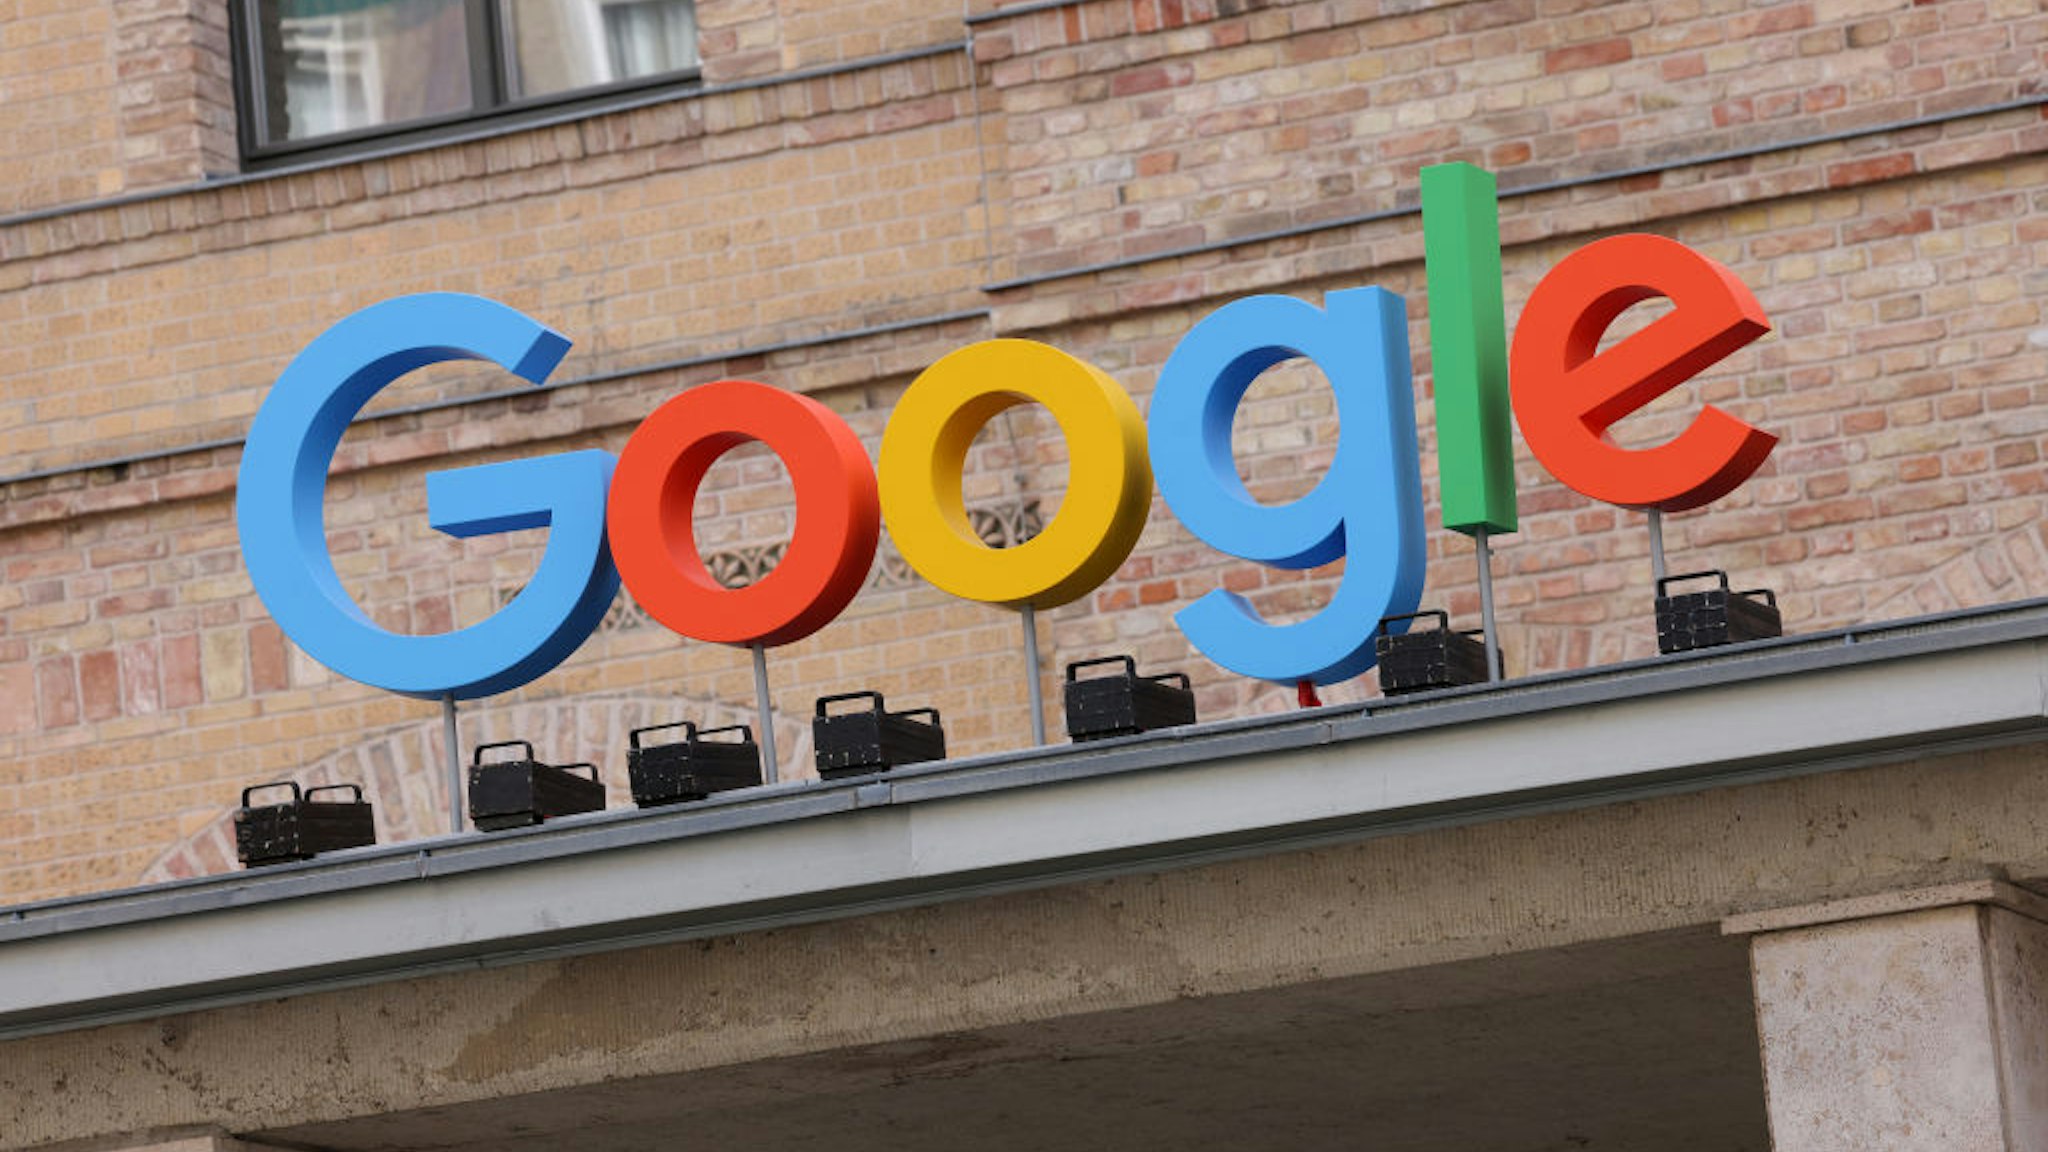 The Google corporate logo hangs outside the Google Germany offices on August 31, 2021 in Berlin, Germany.